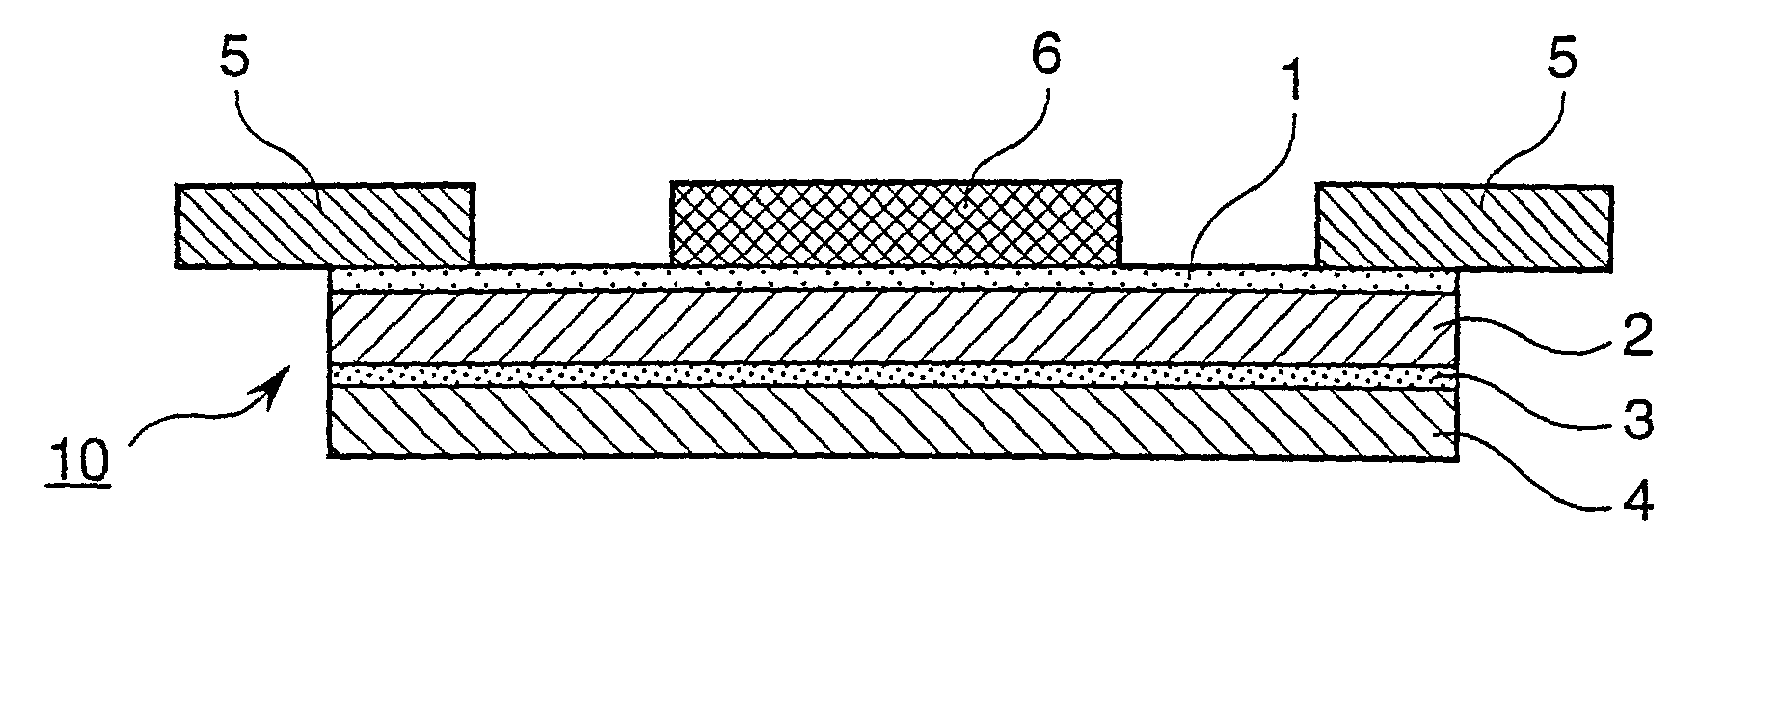 Process for producing a chip